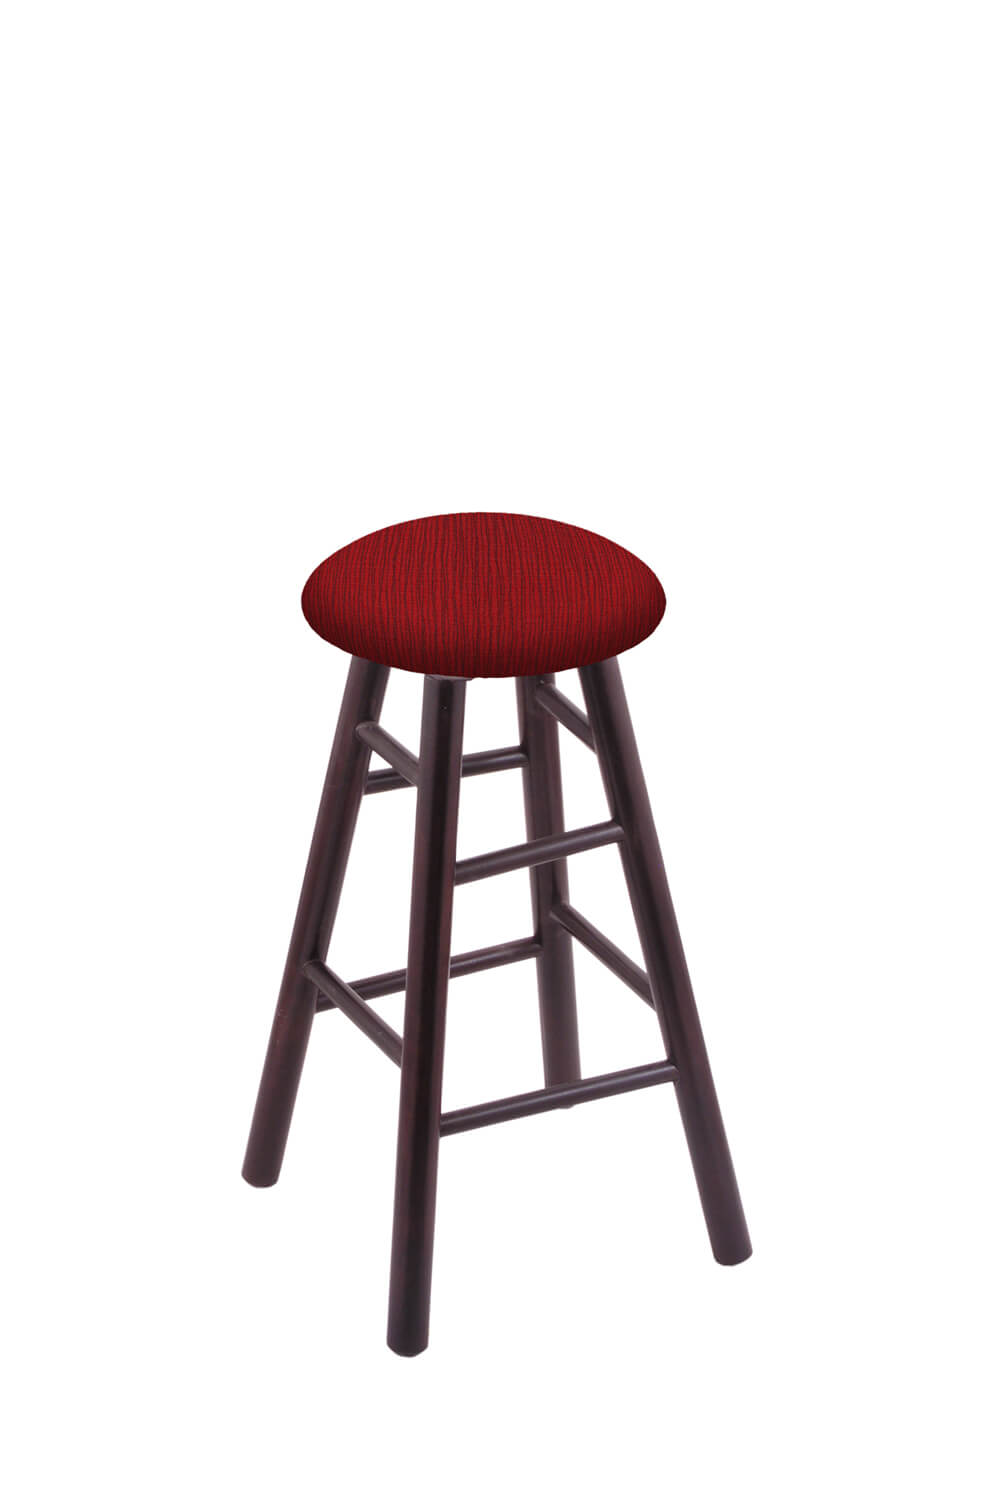 https://barstoolcomforts.com/wp-content/uploads/2017/04/holland-round-cushion-backless-swivel-stool-smooth-legs-in-dark-cherry-wood-and-graph-ruby-seat-cushion.jpg